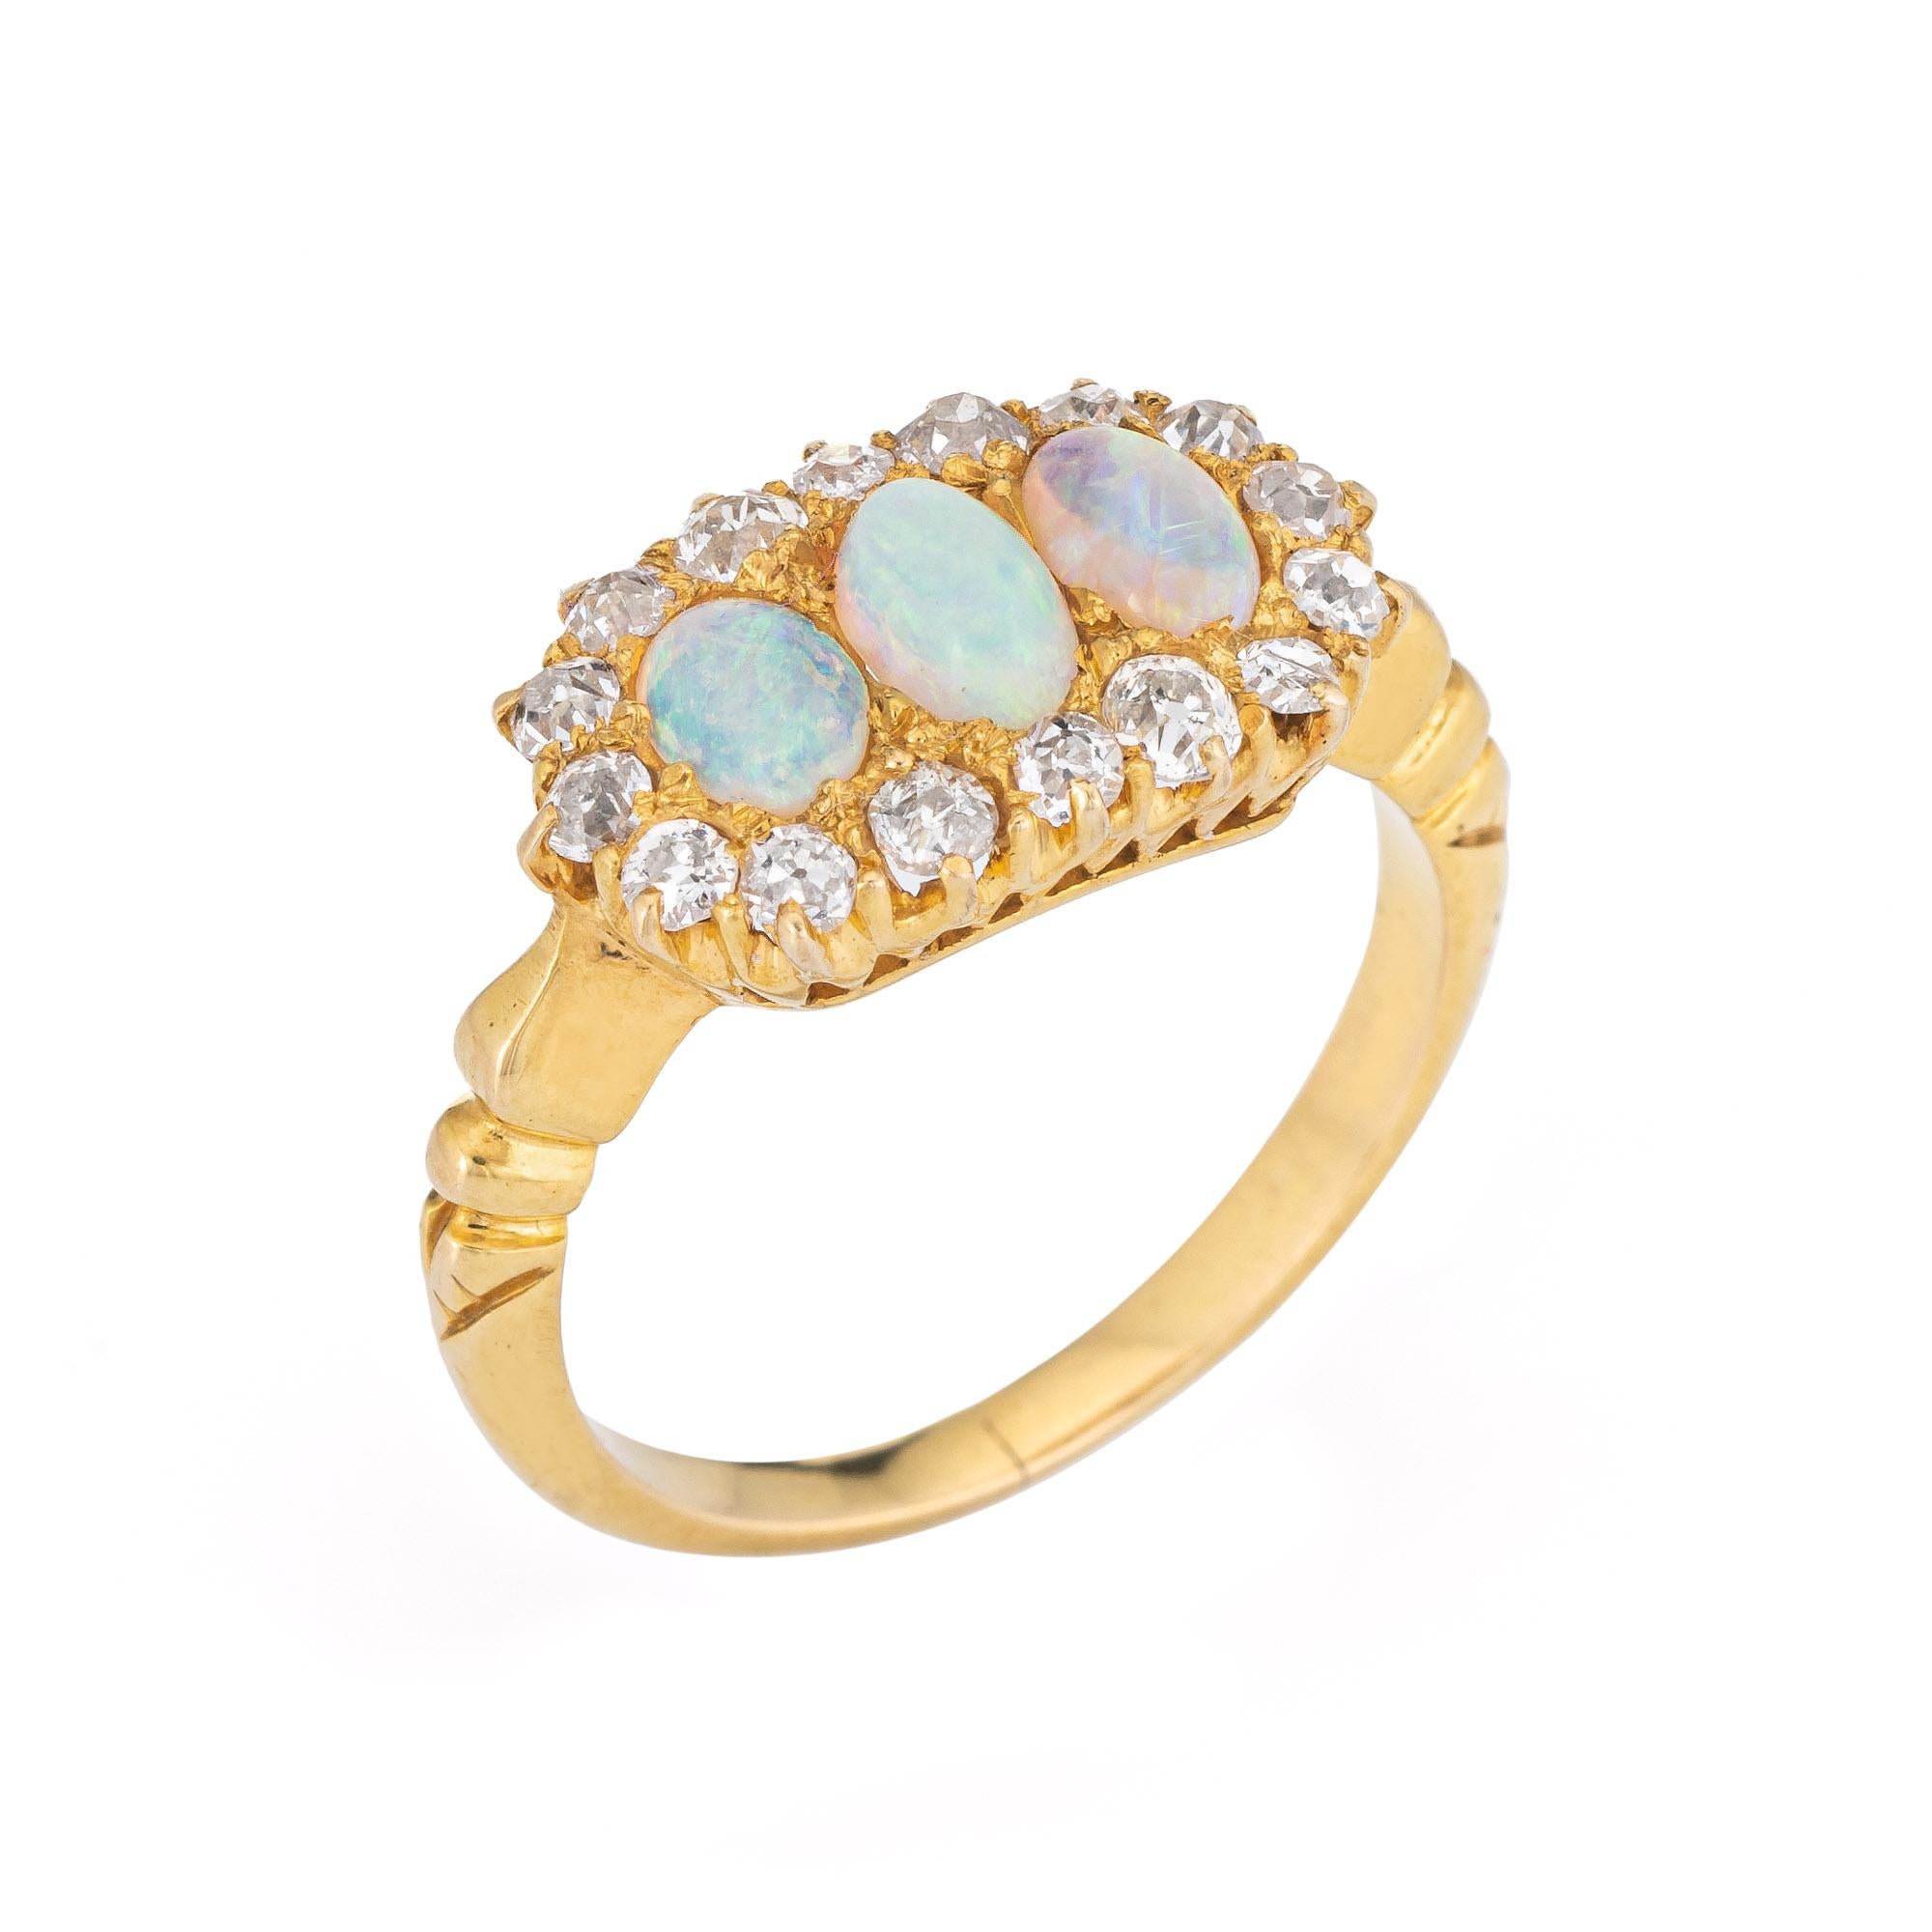 Finely detailed antique Victorian opal & diamond ring (circa 1880s to 1900s), crafted in 18 karat rose gold. 

Three opals measure 5mm x 3mm (estimated at 0.25 carats each - 0.75 carats total estimated weight), accented with 16 estimated 0.05 old